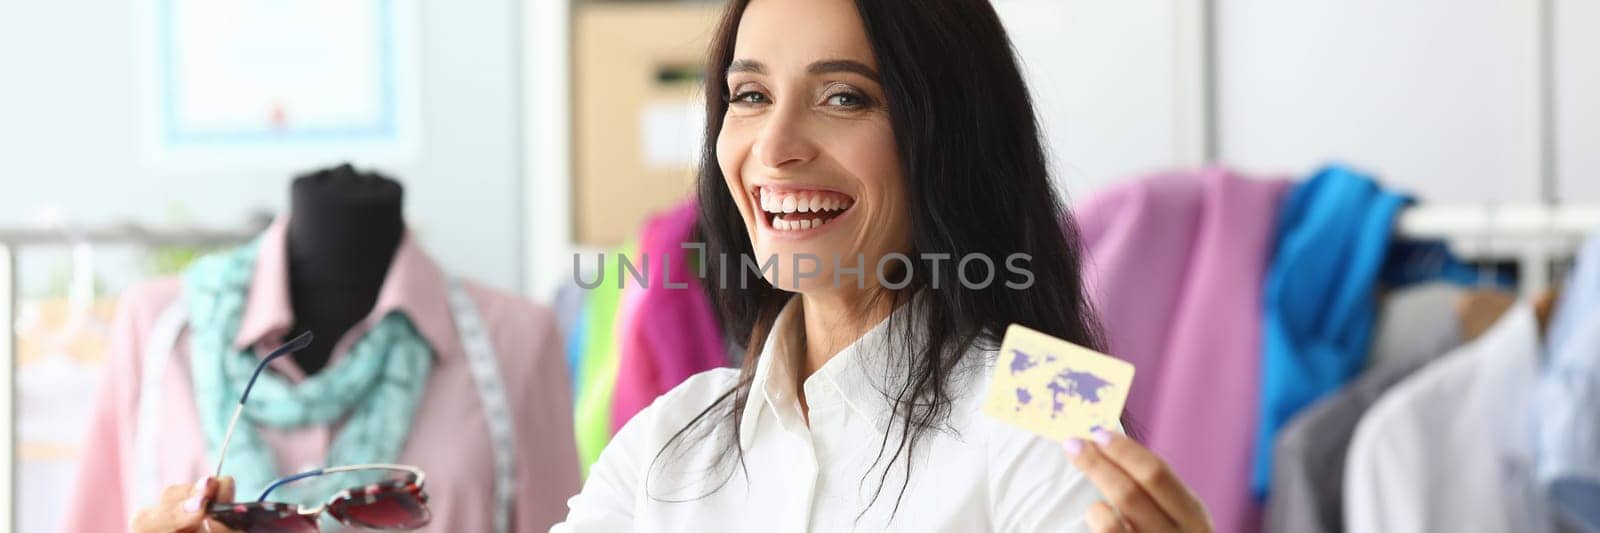 Happy smiling laughing woman holding bank card and purchase packages. Positive emotions shopping concept